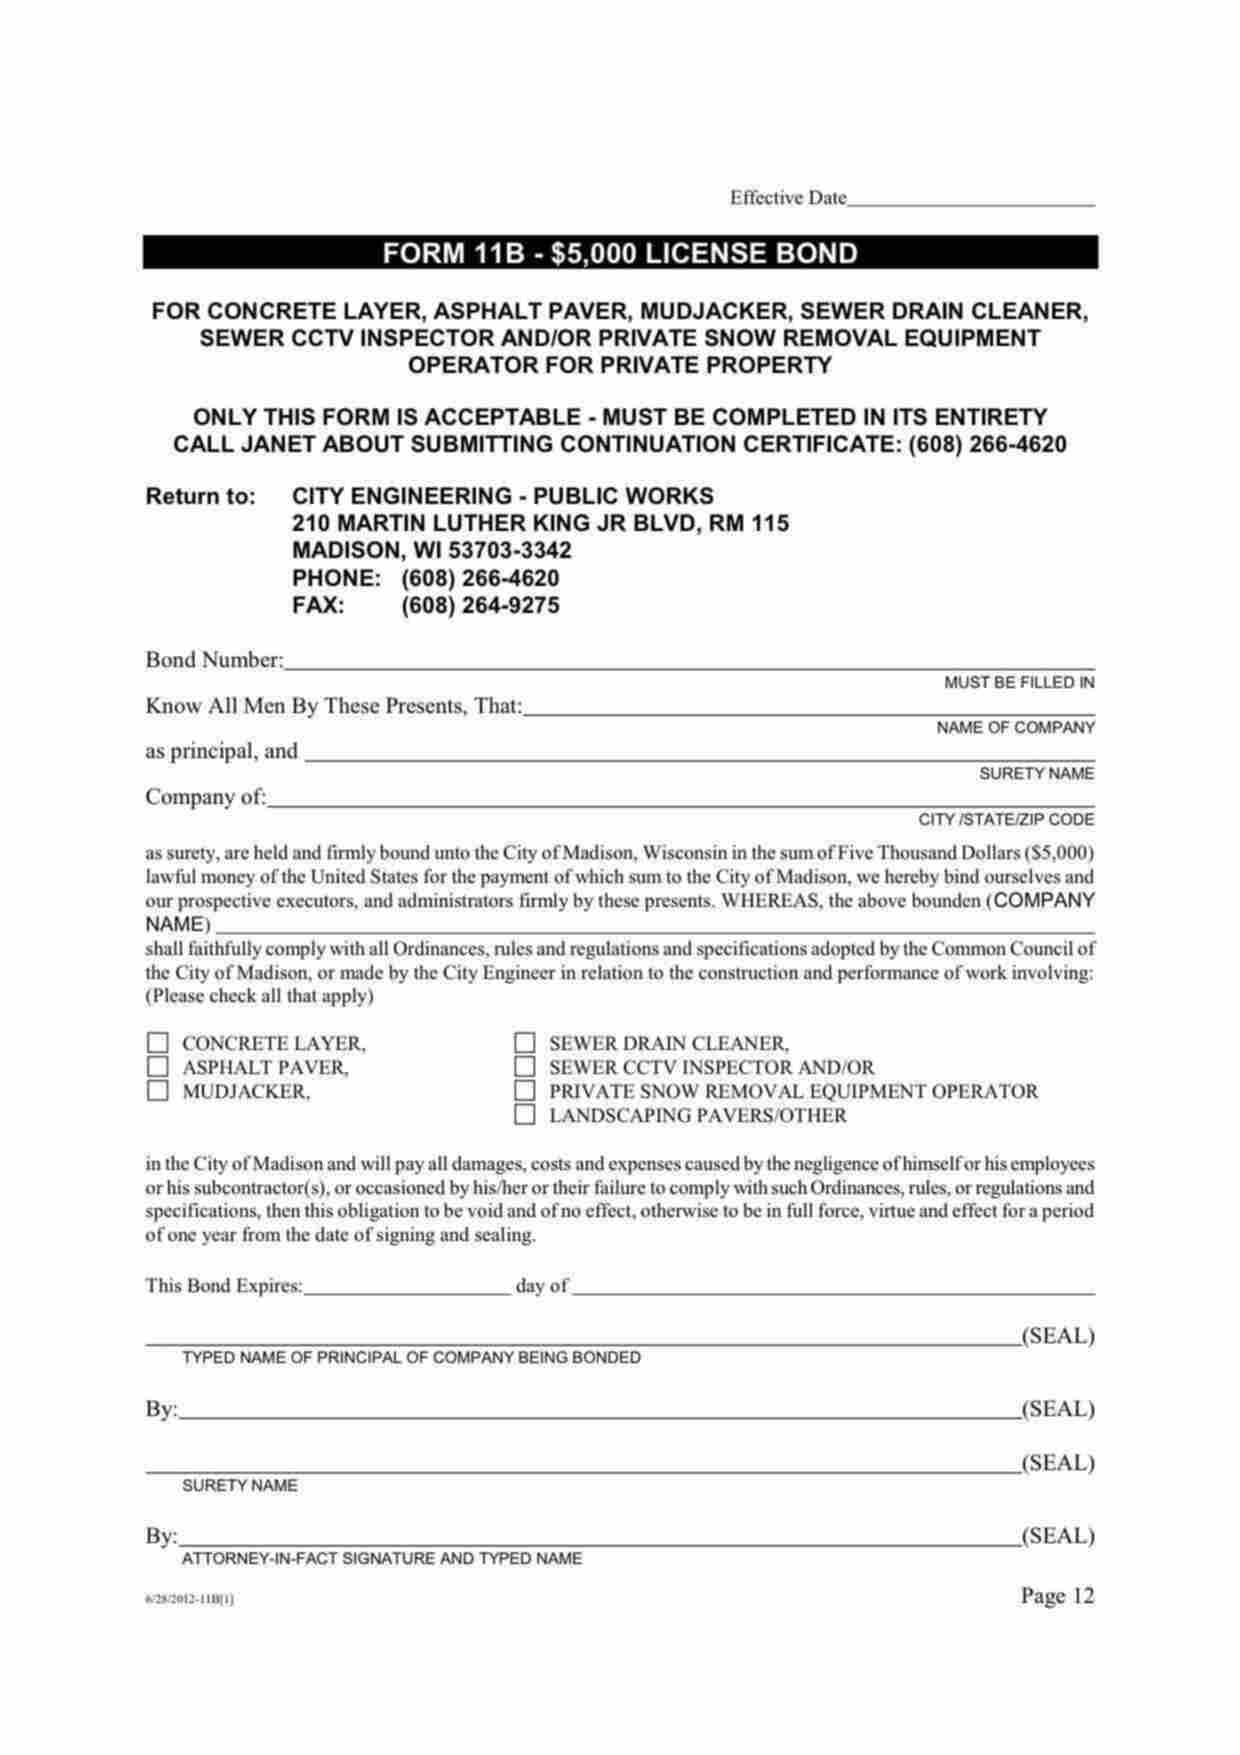 Wisconsin Sewer Drain Cleaner Bond Form